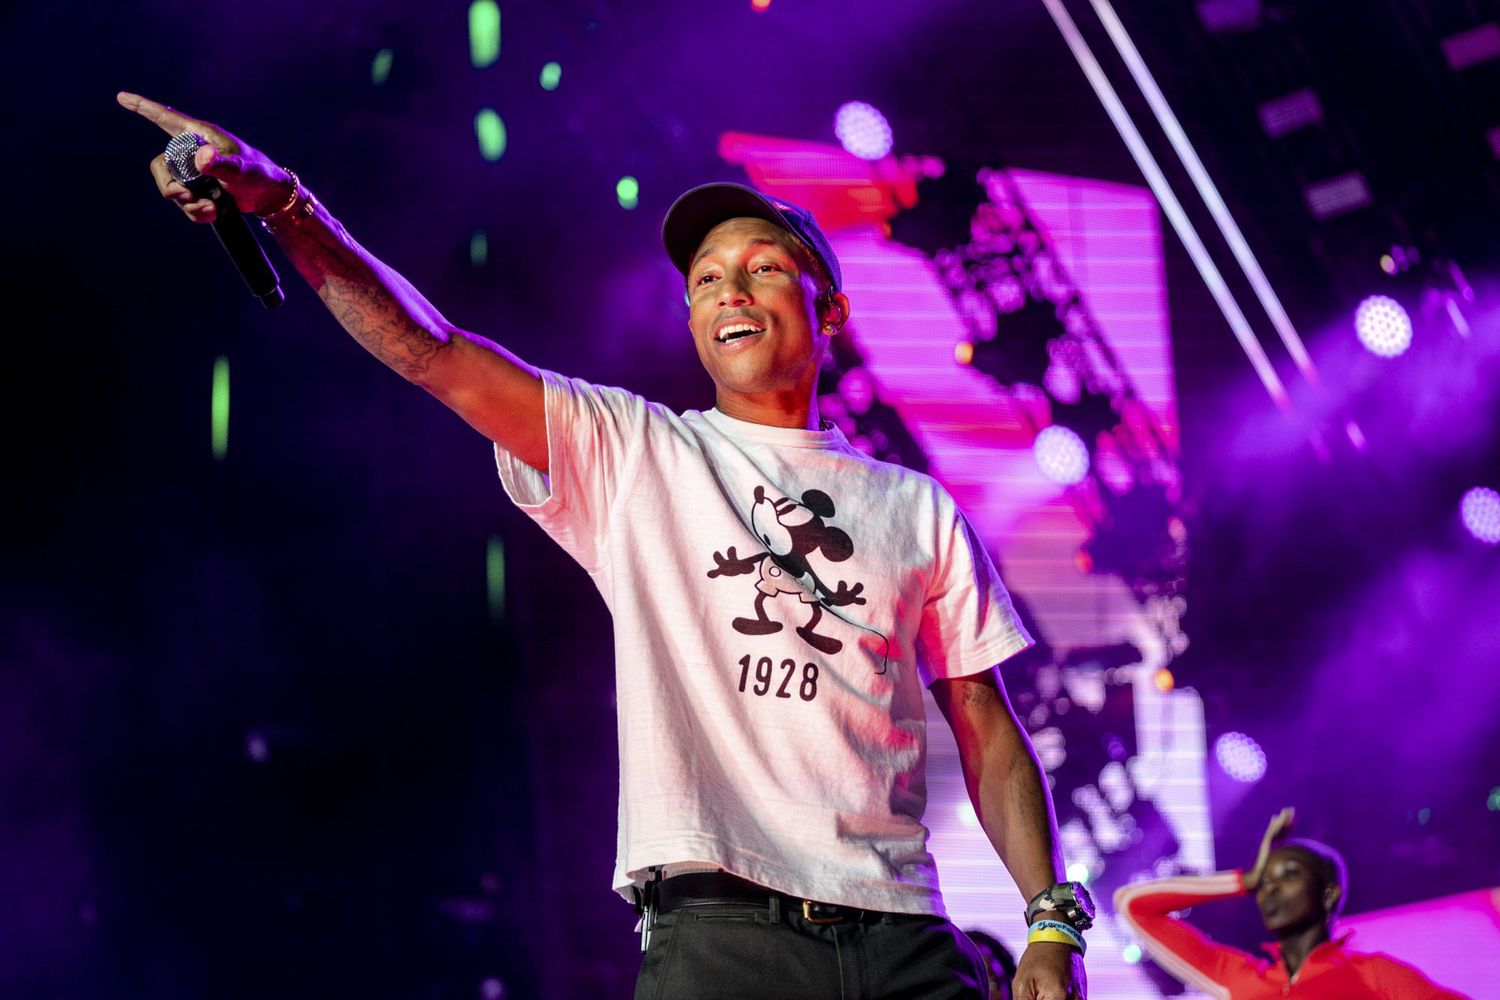 NEW ORLEANS, LOUISIANA - JULY 07: Pharrell Williams performs at the 25th Essence Festival at the Mercedes-Benz Superdome on July 07, 2019 in New Orleans, Louisiana. (Photo by Josh Brasted/FilmMagic)